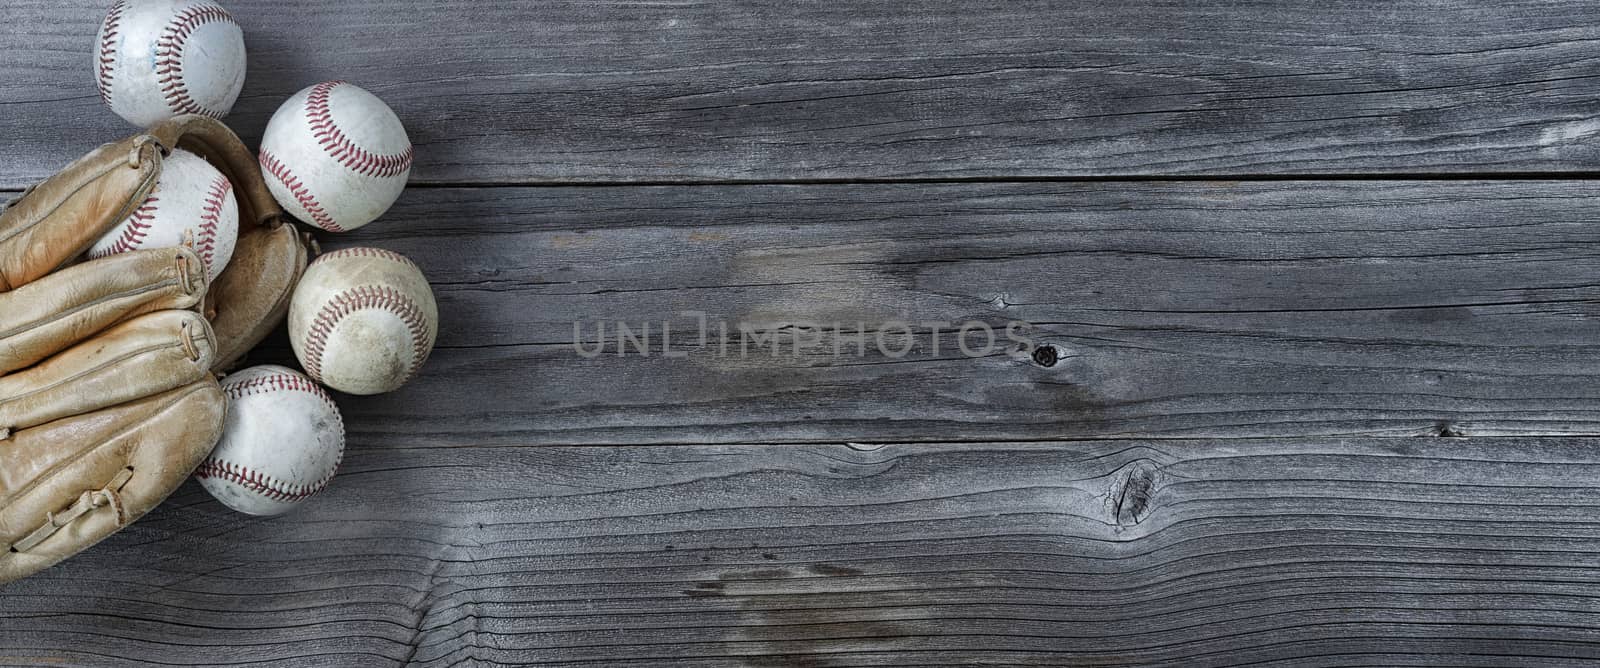 Old used baseballs and weathered glove on vintage wooden background. Baseball sports concept with copy space